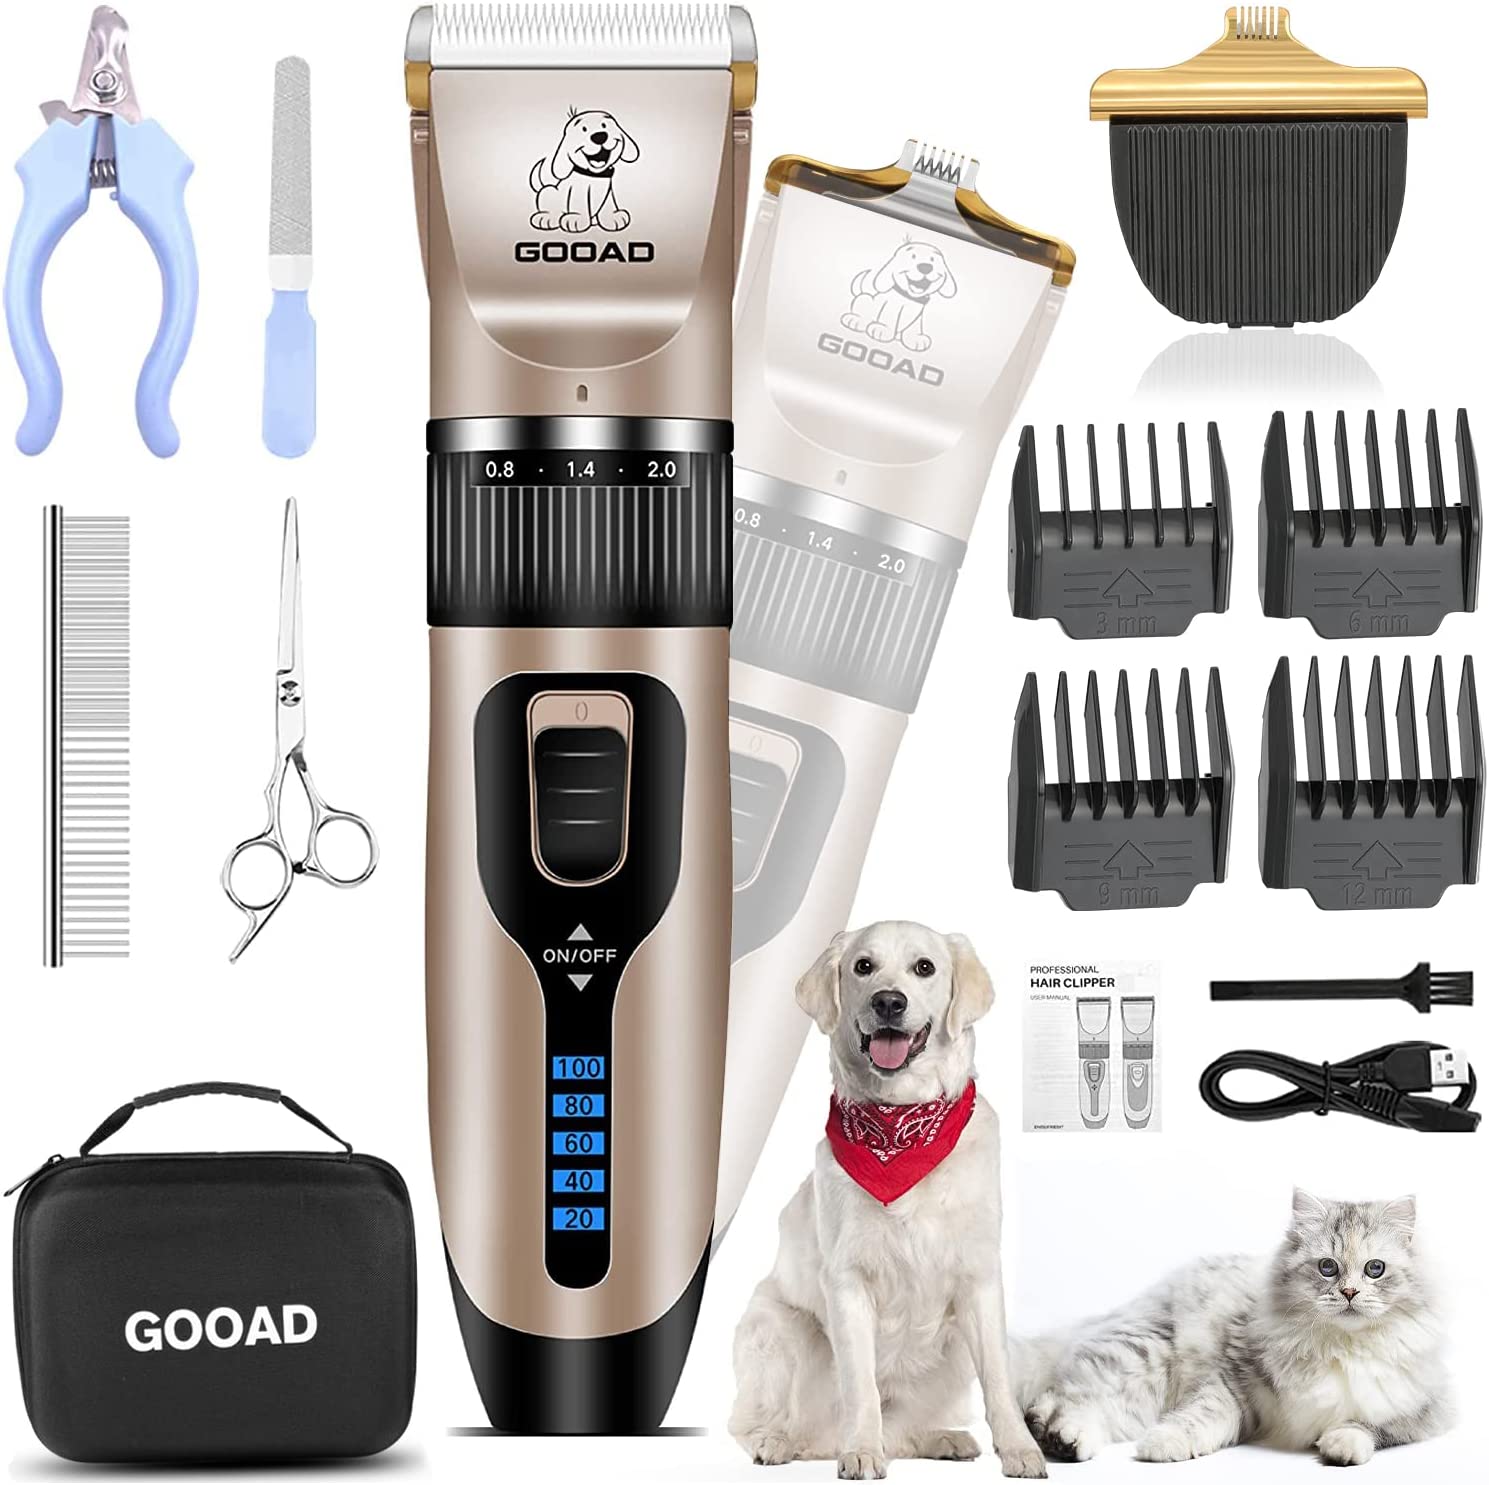 Gooad shaver clippers